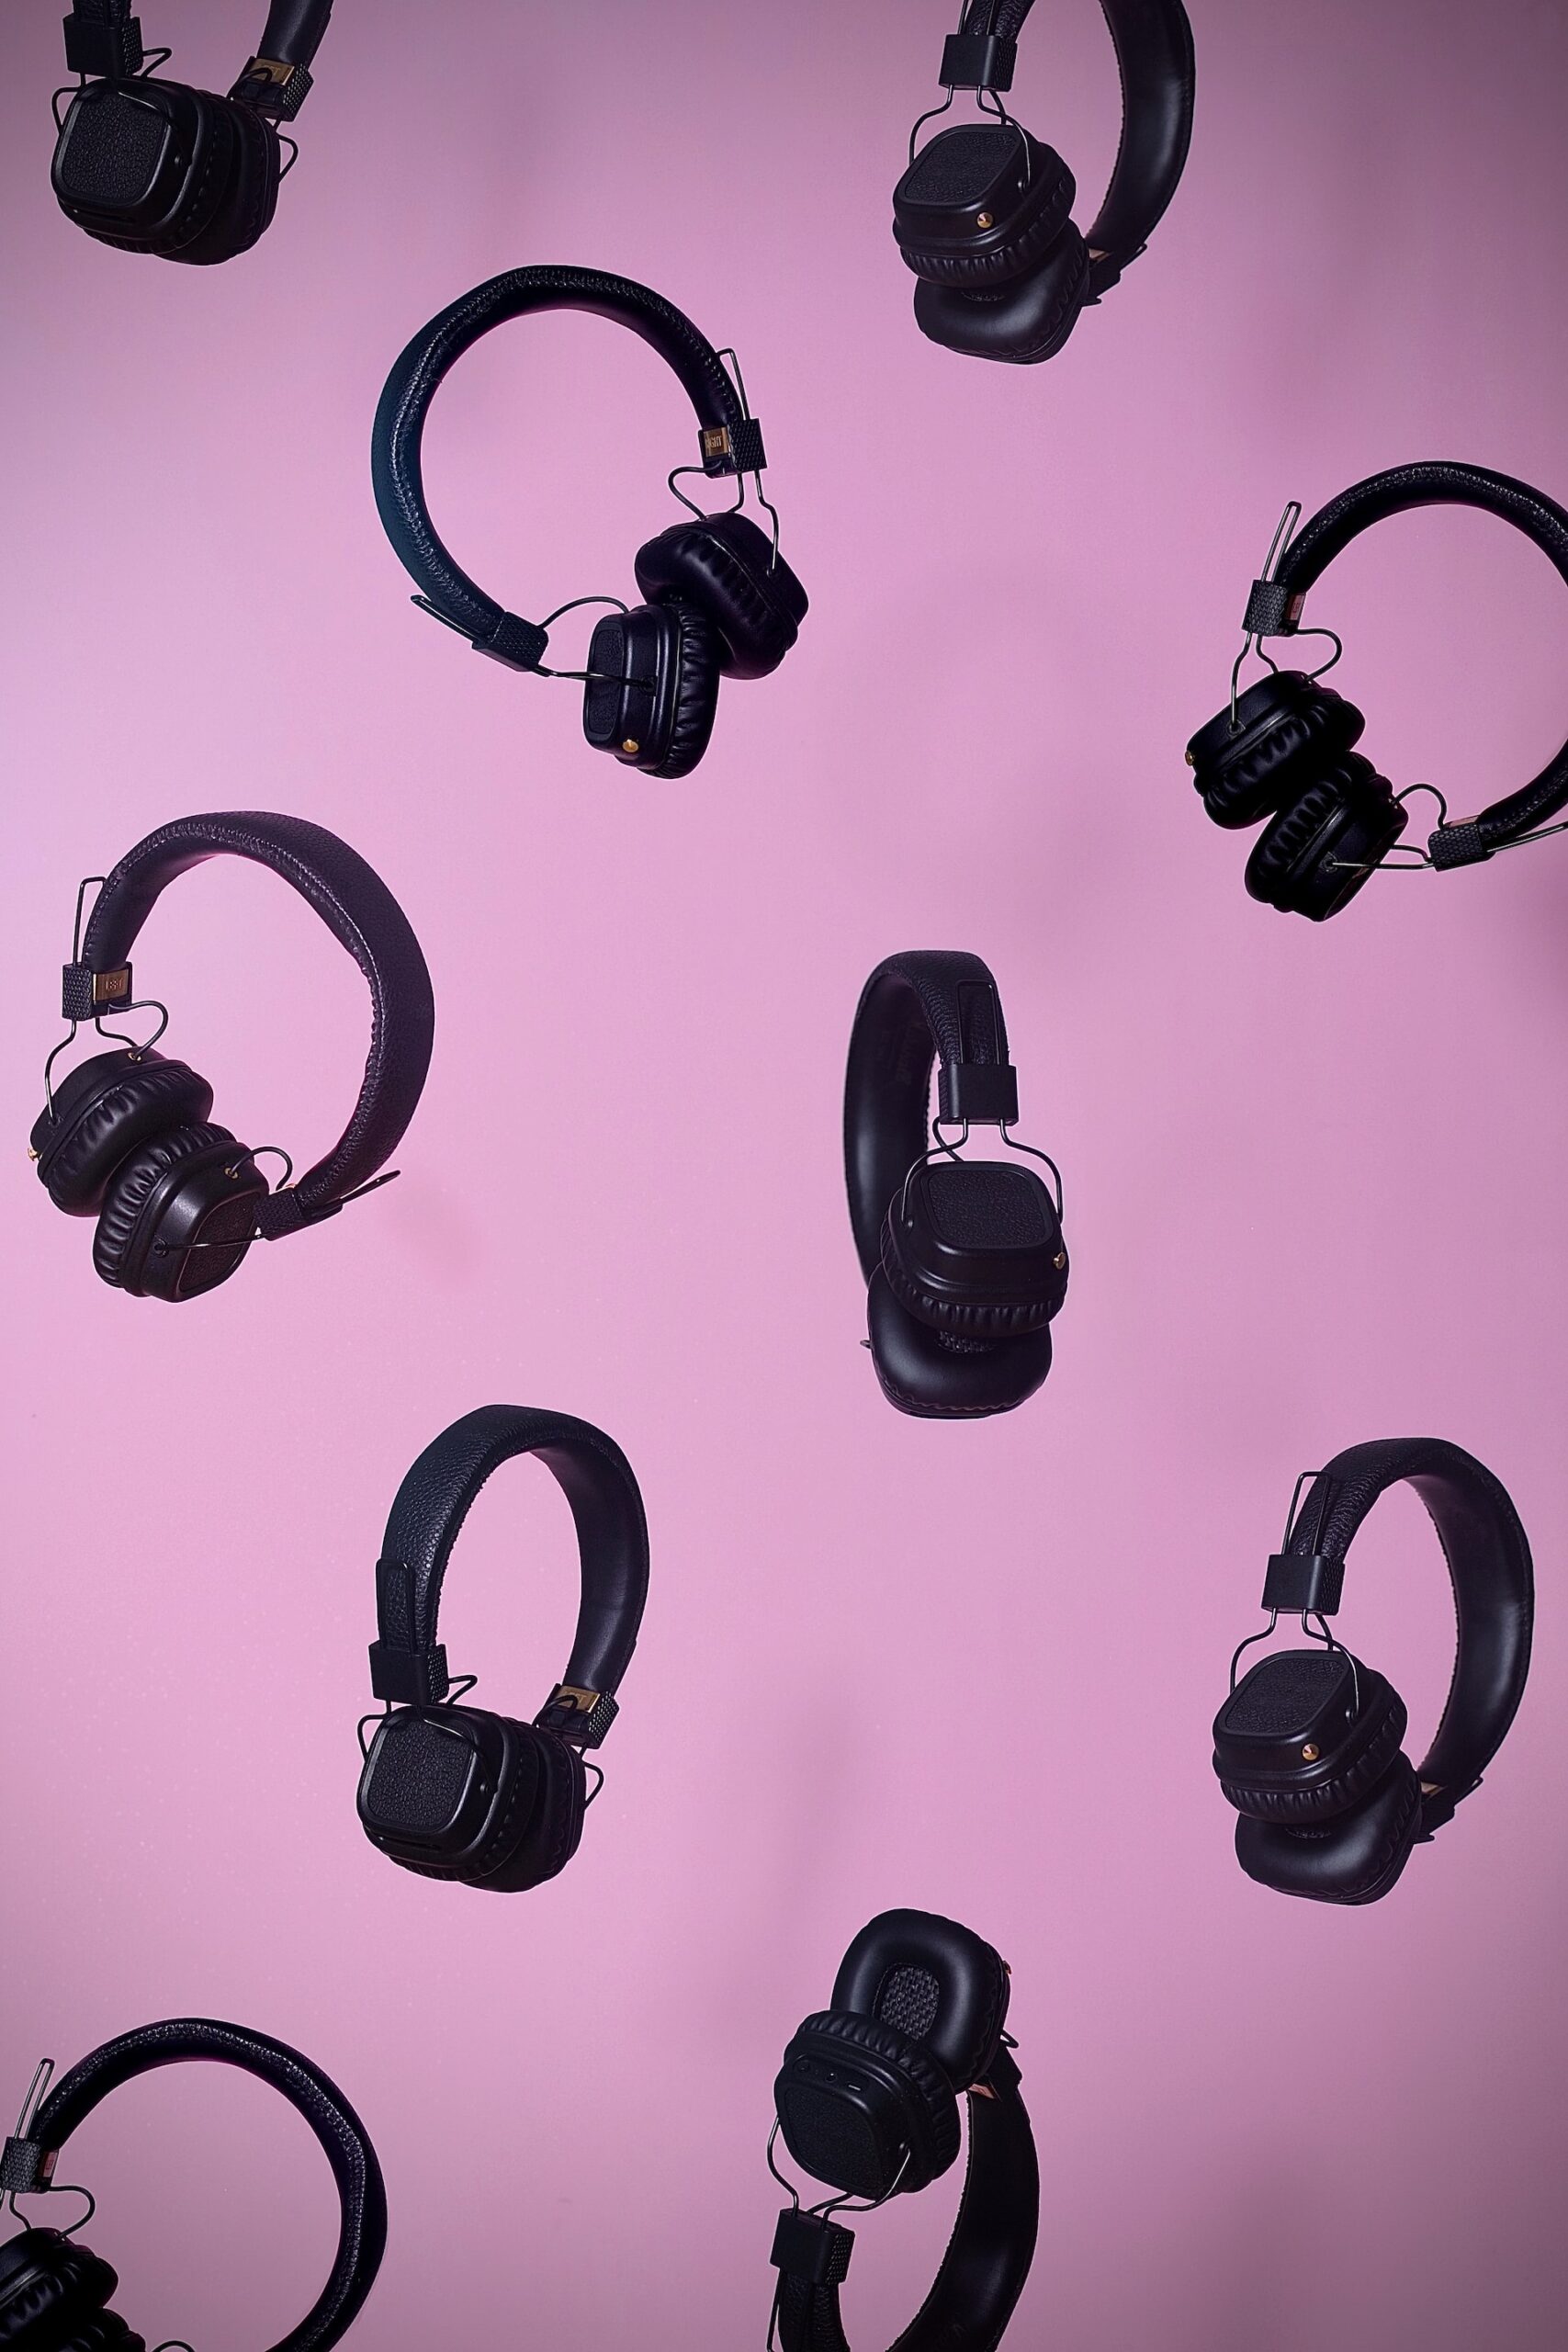 7 Headphones for Studying That Students Will Love